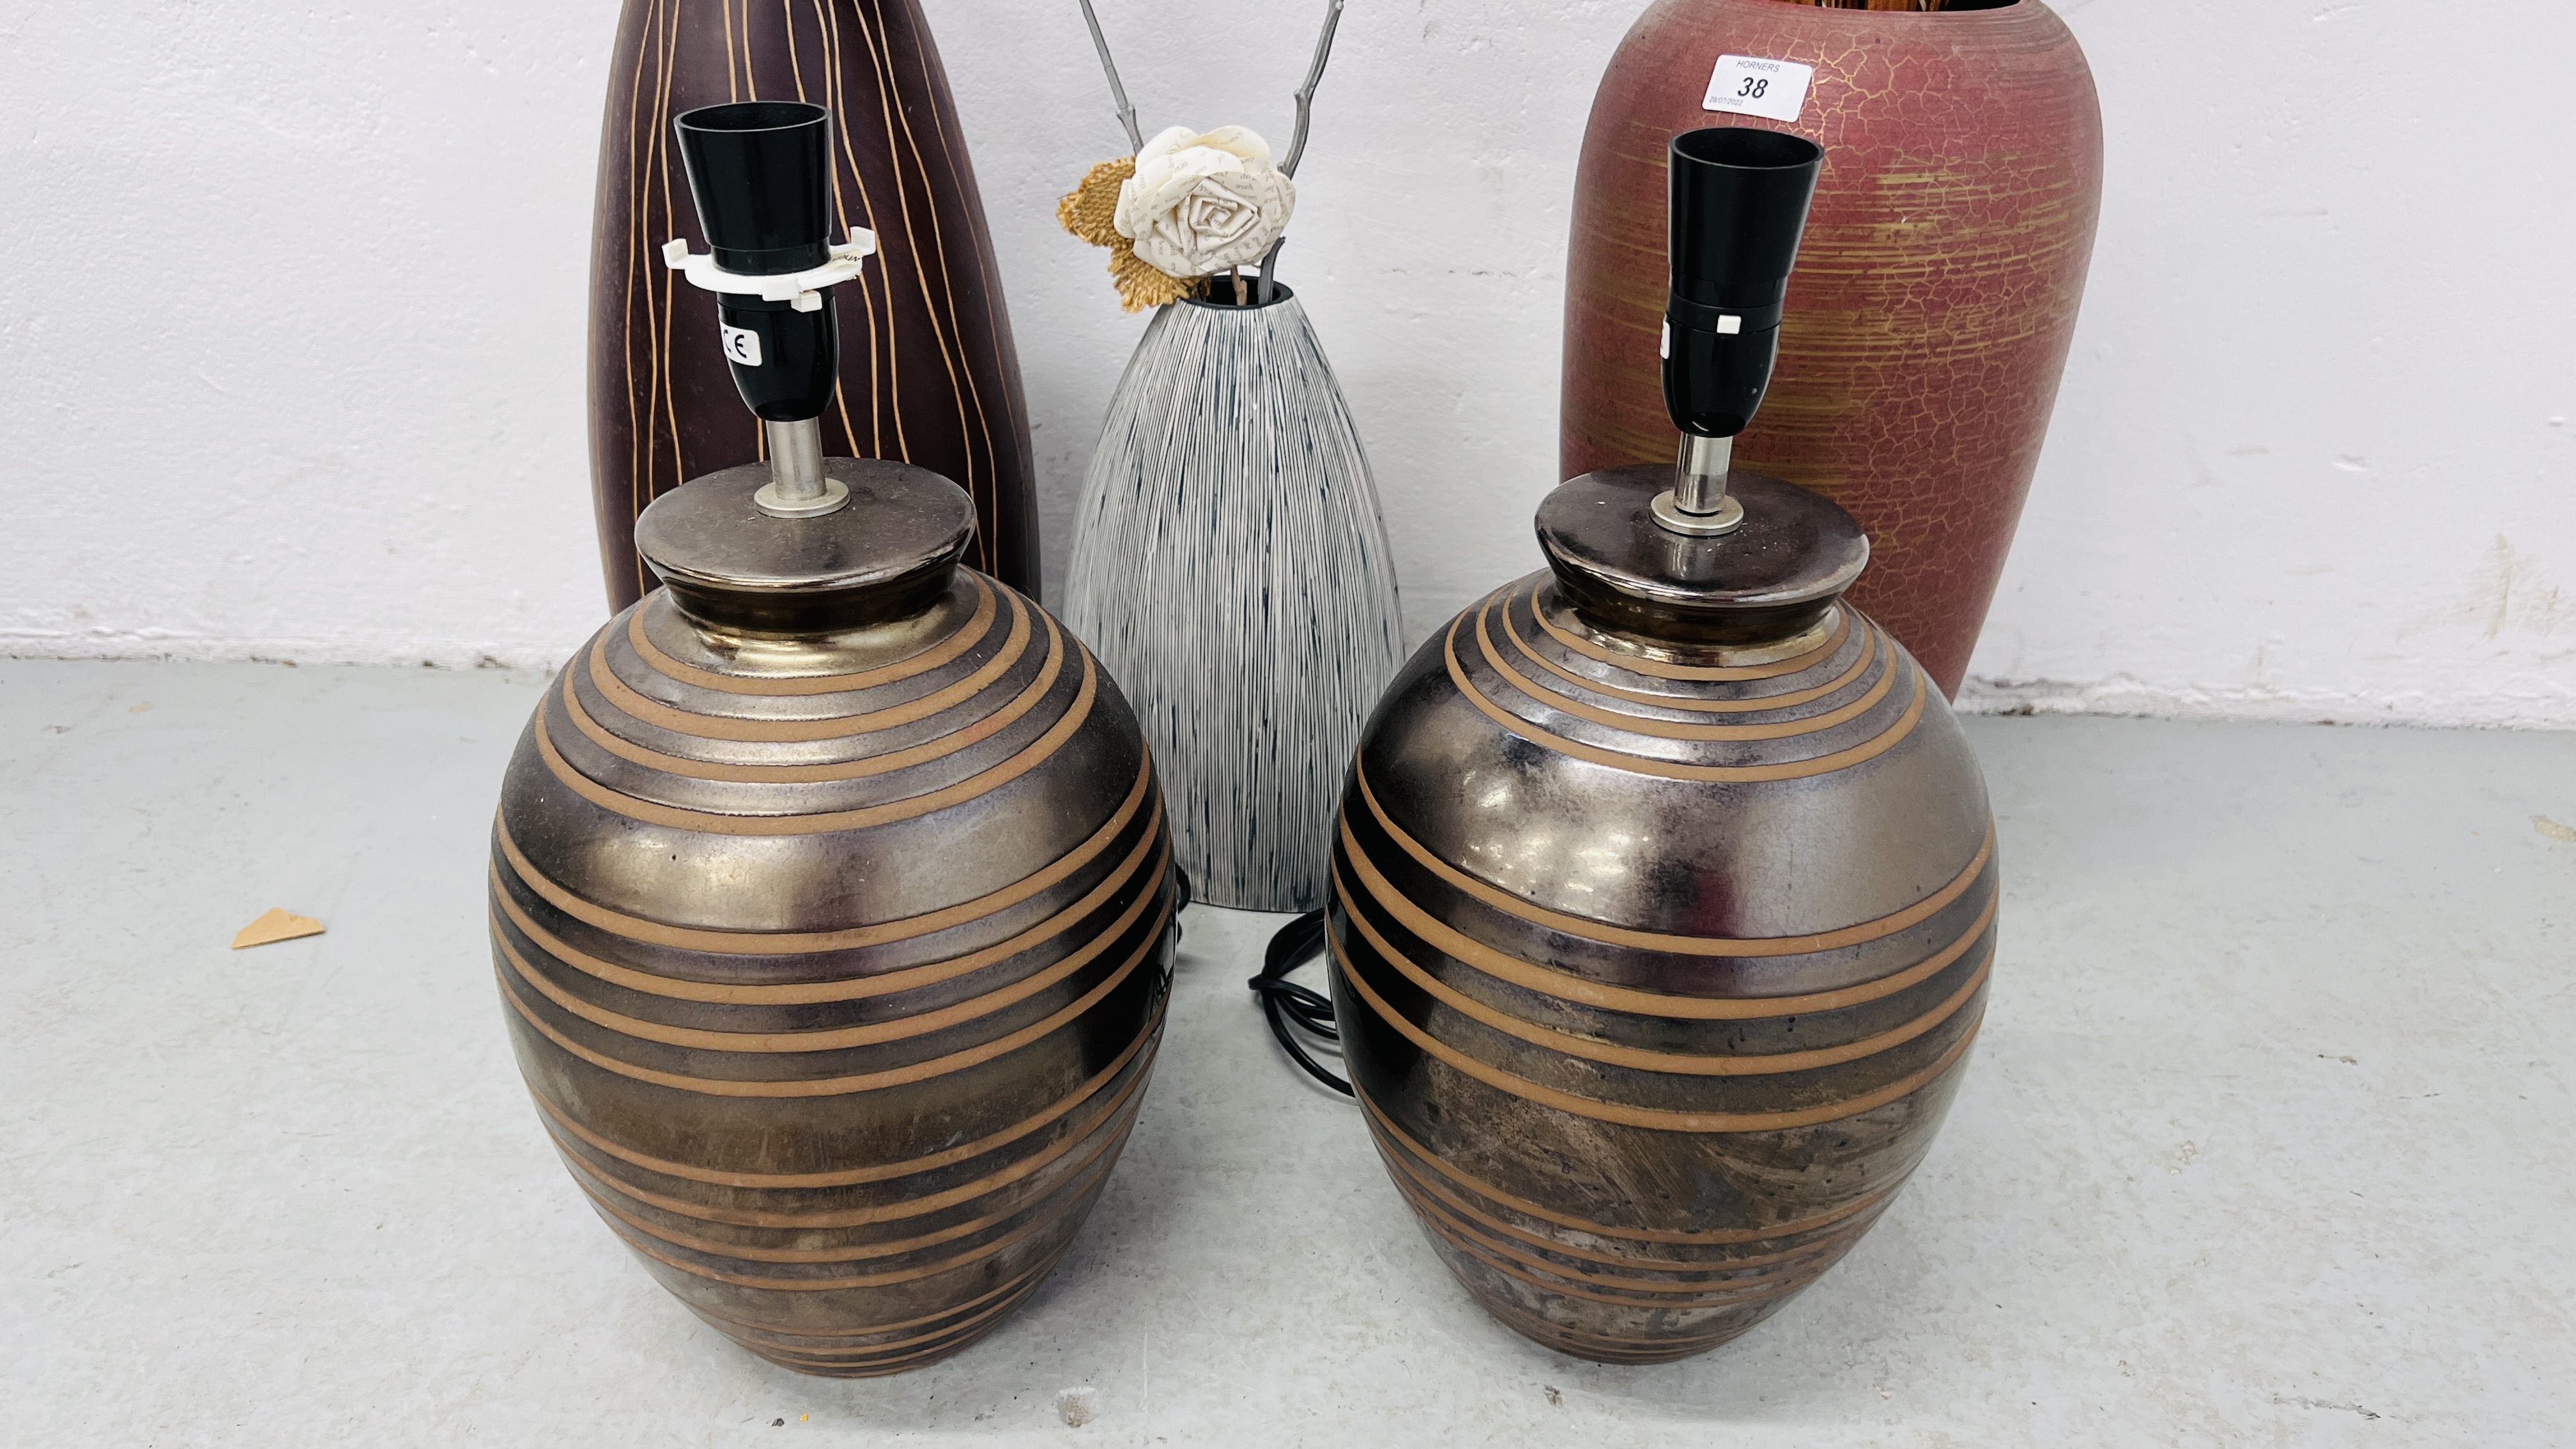 TWO MODERN DESIGNER VASES CONTAINING VARIOUS GRASSES ALONG WITH A PAIR OF DESIGNER POTTERY LAMPS - Image 2 of 6